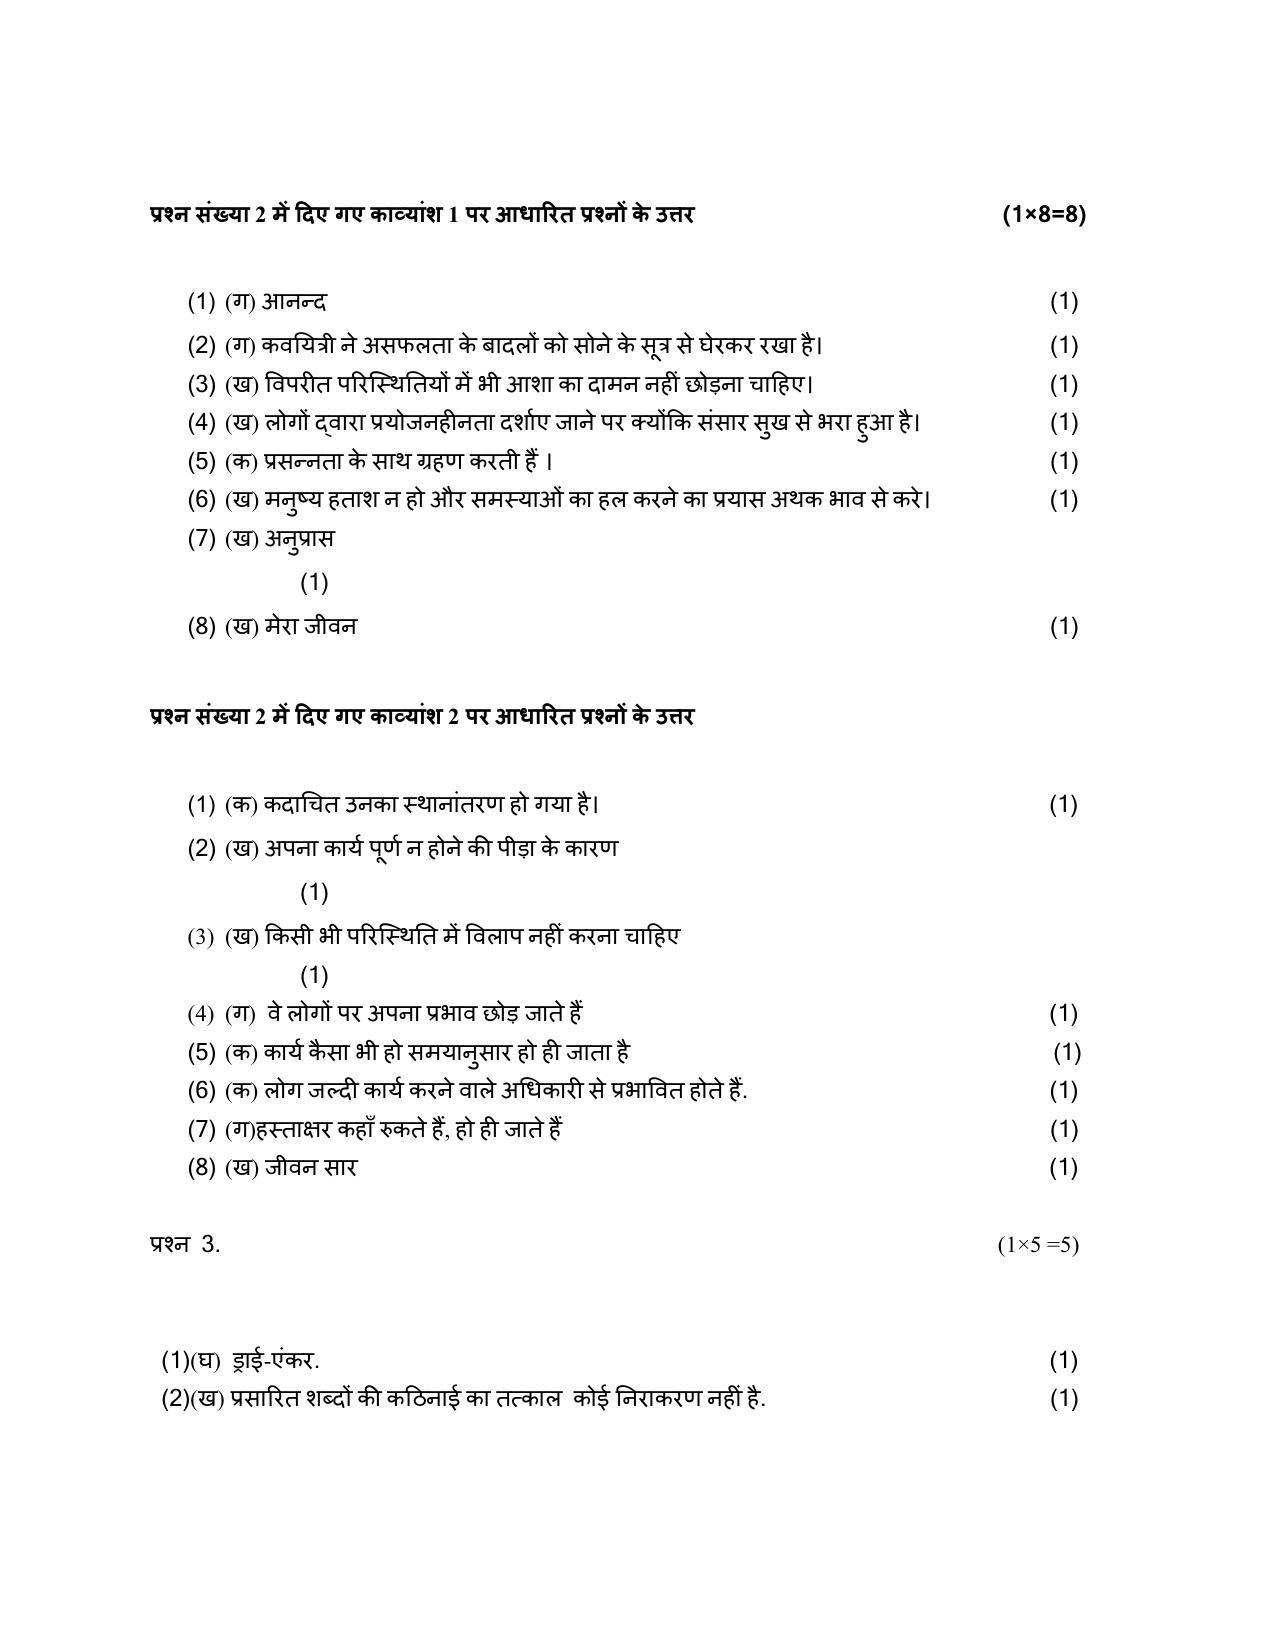 CBSE Class 12 Hindi Elective Marking Scheme and Solutions 2021-22 - Page 2